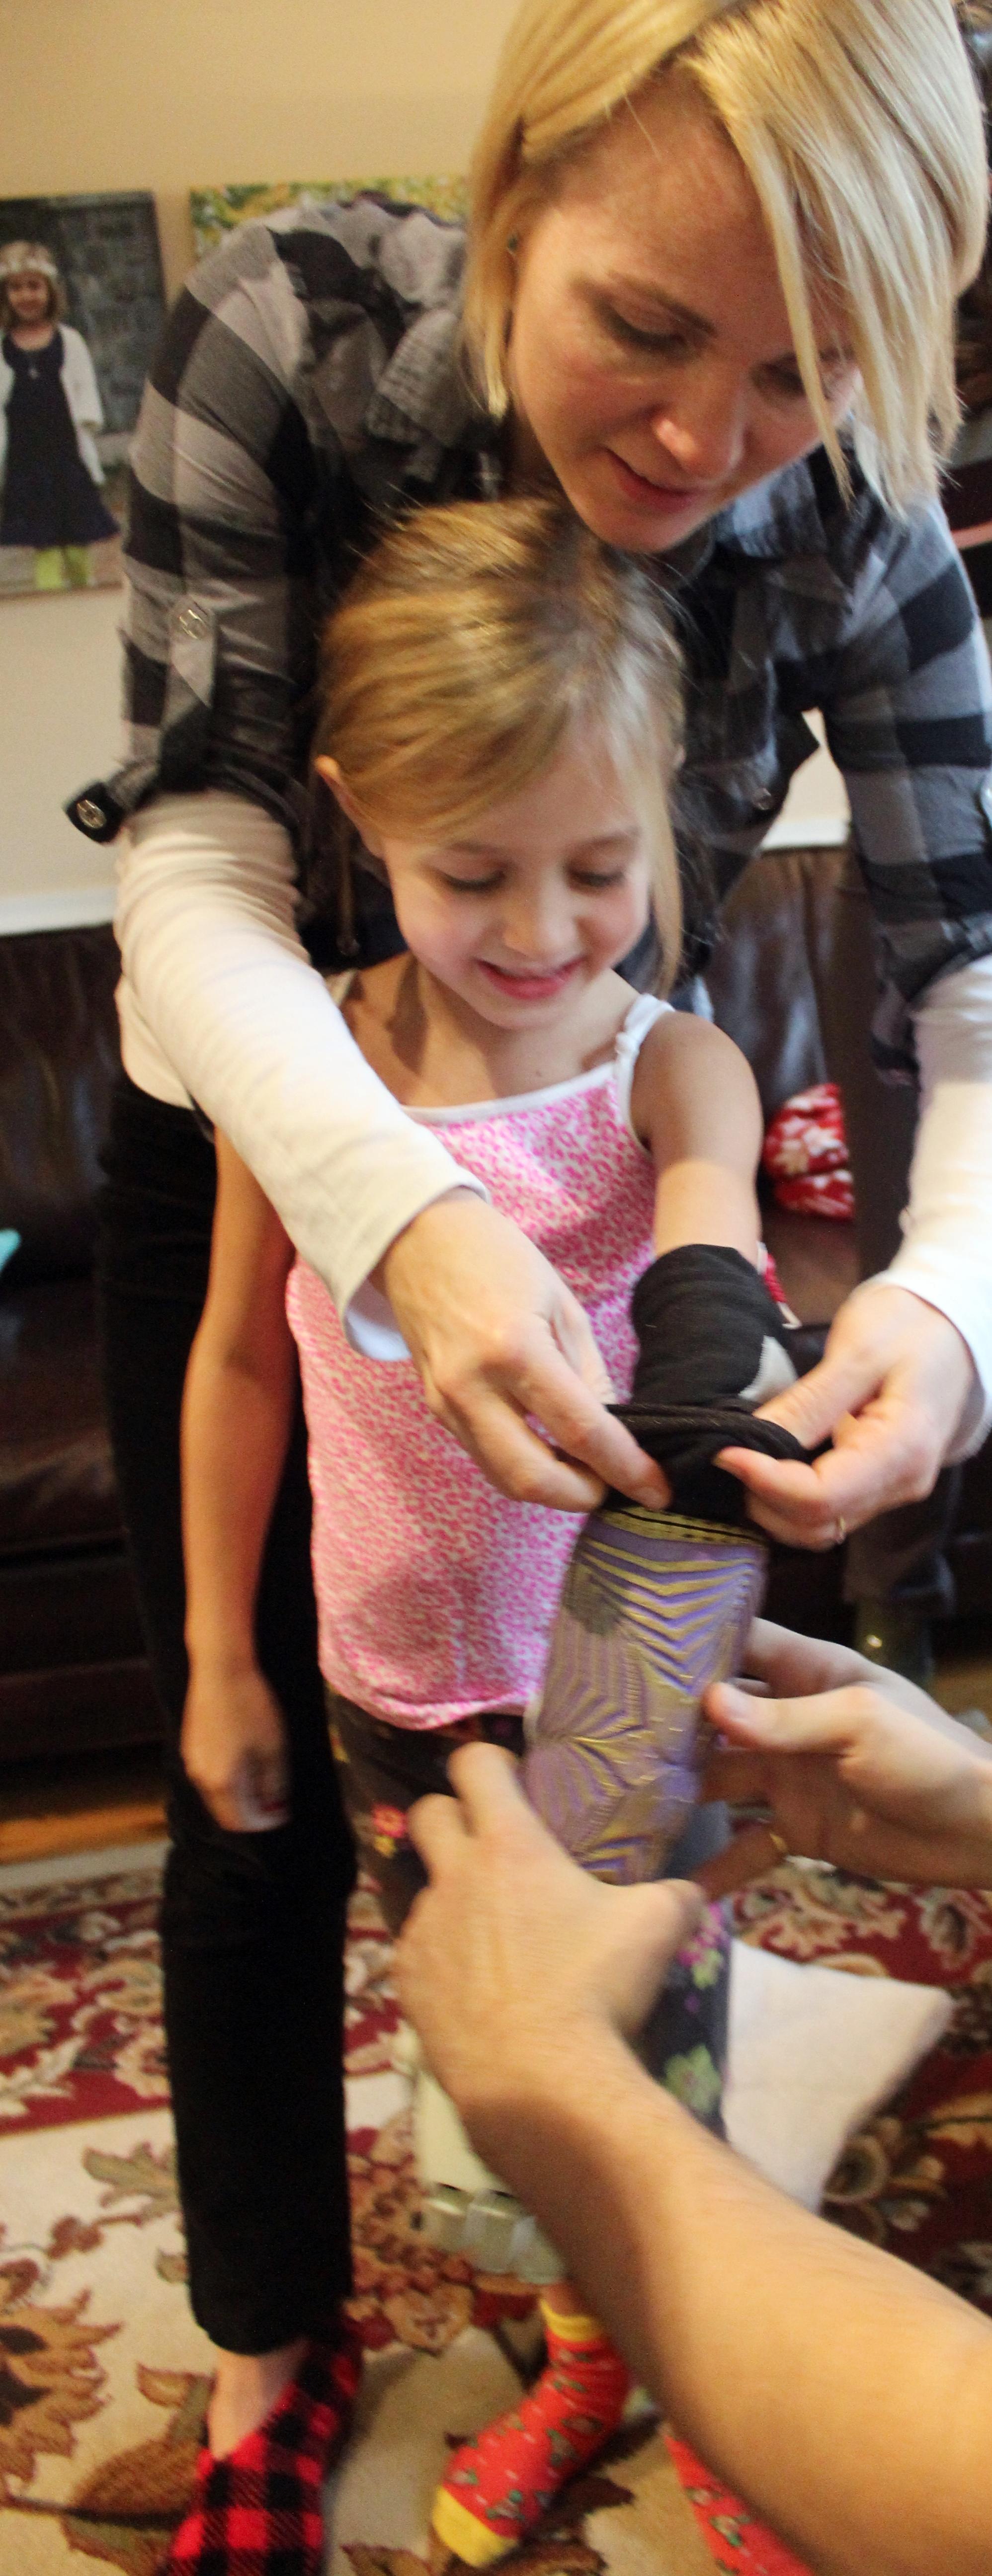 Holiday Miracle 3D Printed Myoelectric Arm Allows Girl to Hug Family